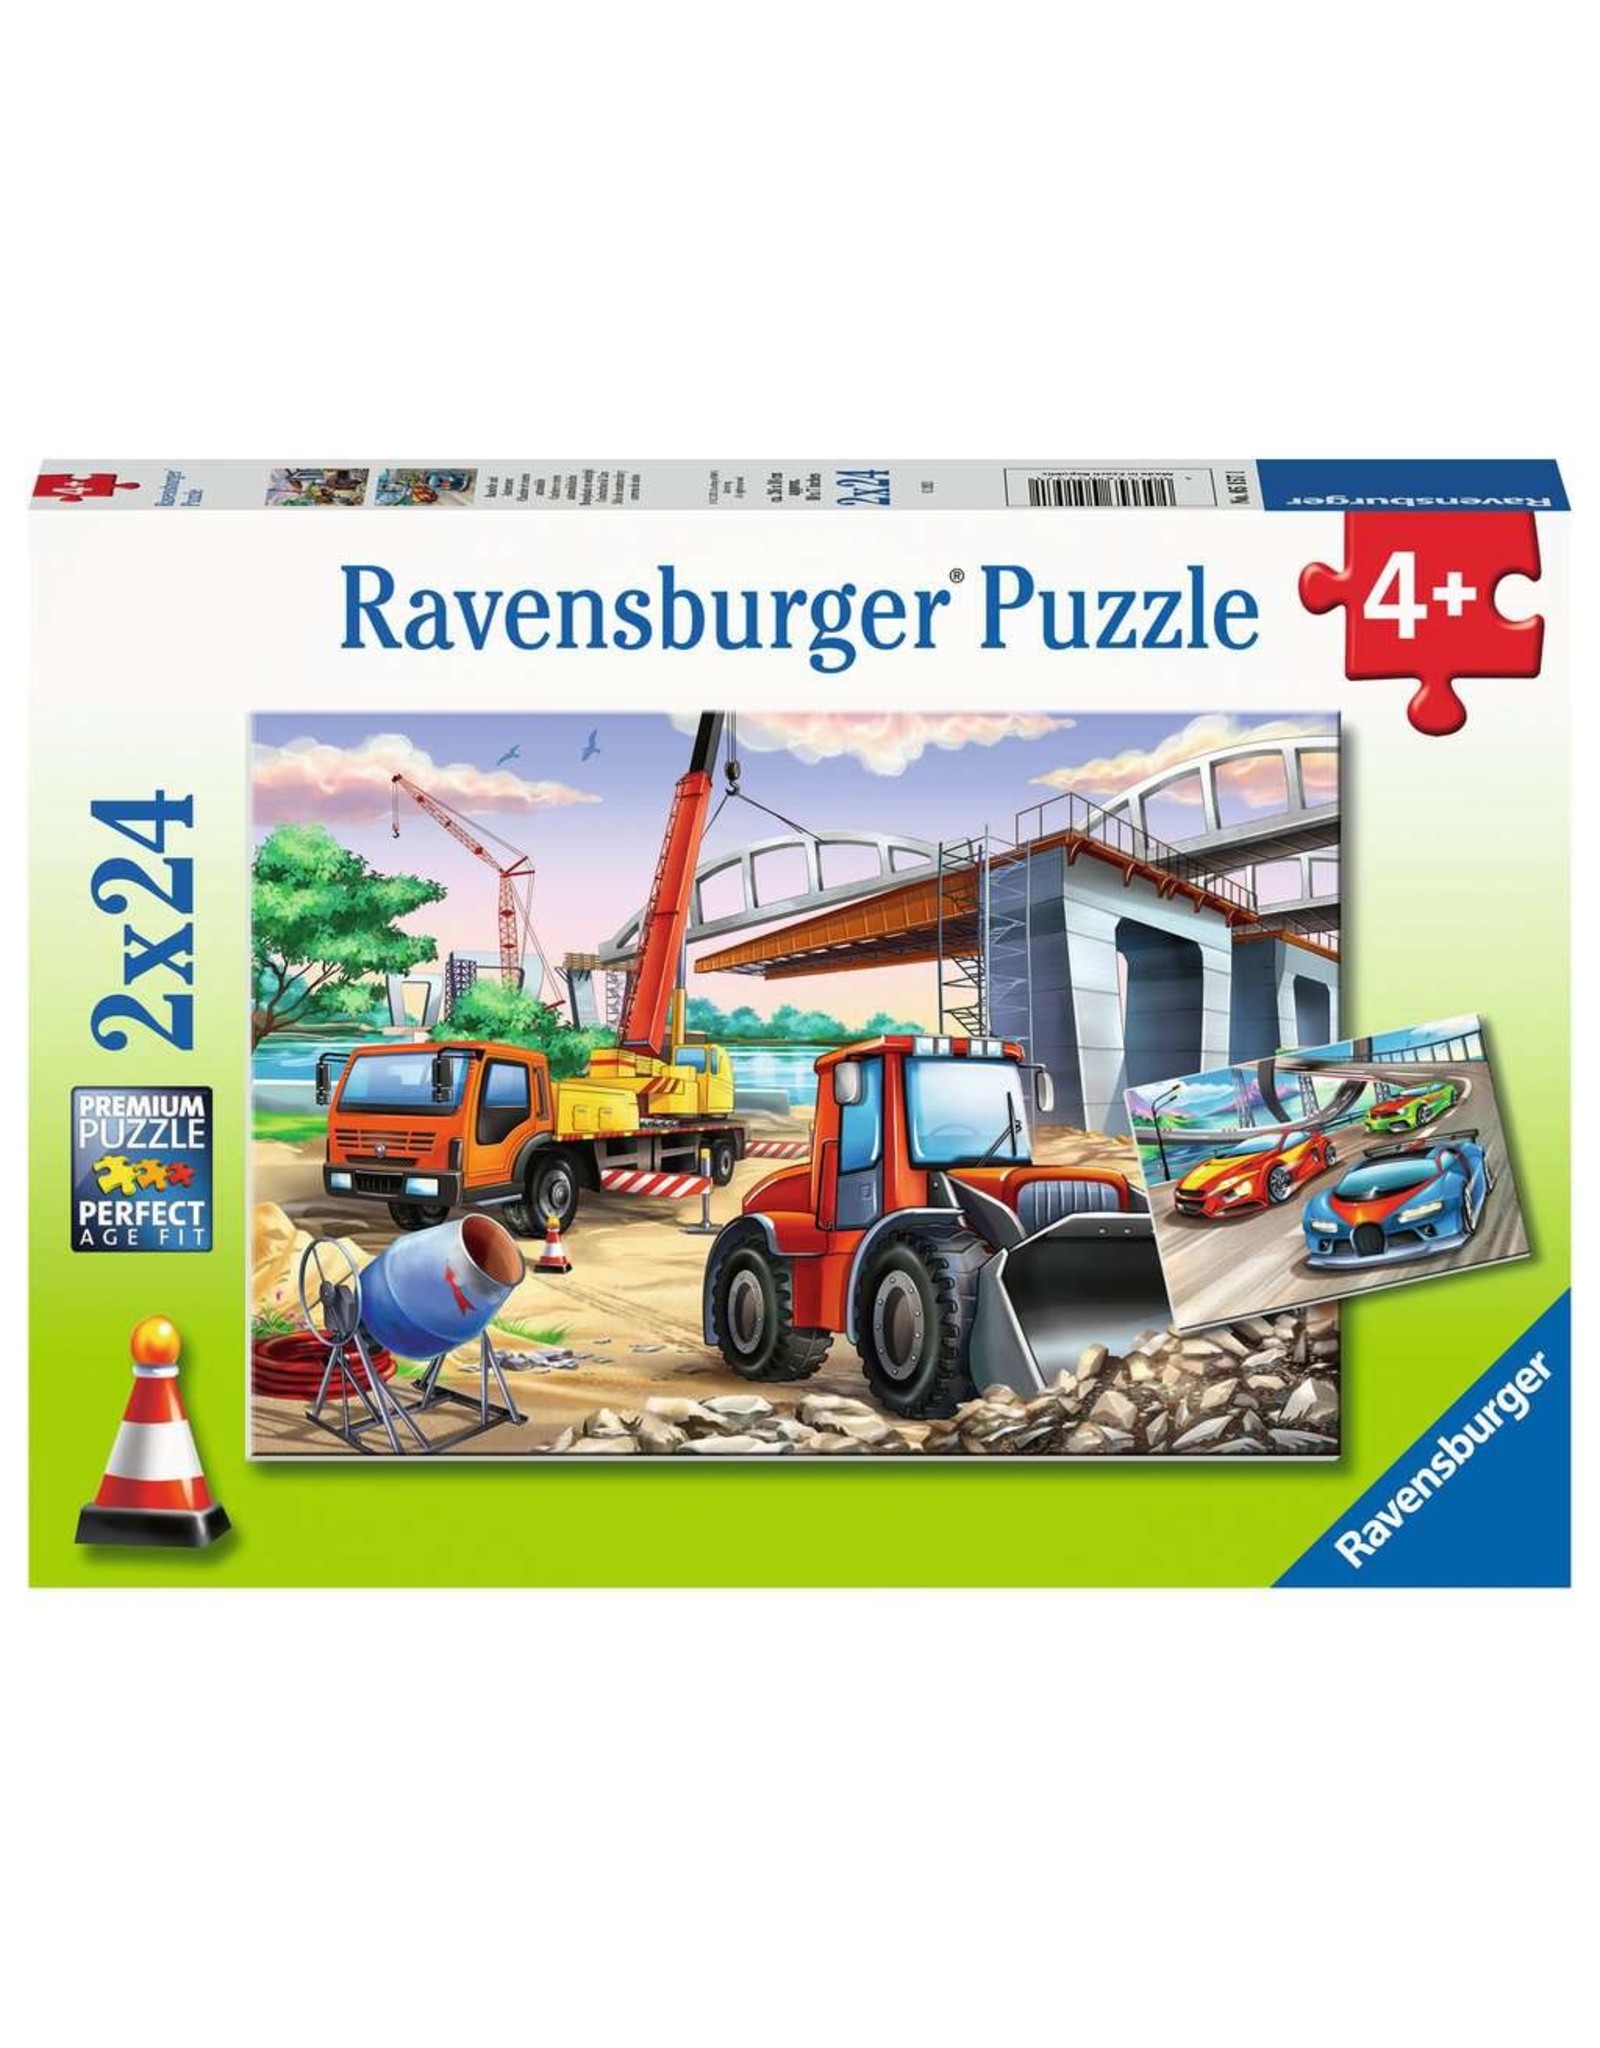 Construction and Cars 2 Puzzles 24 pc Each